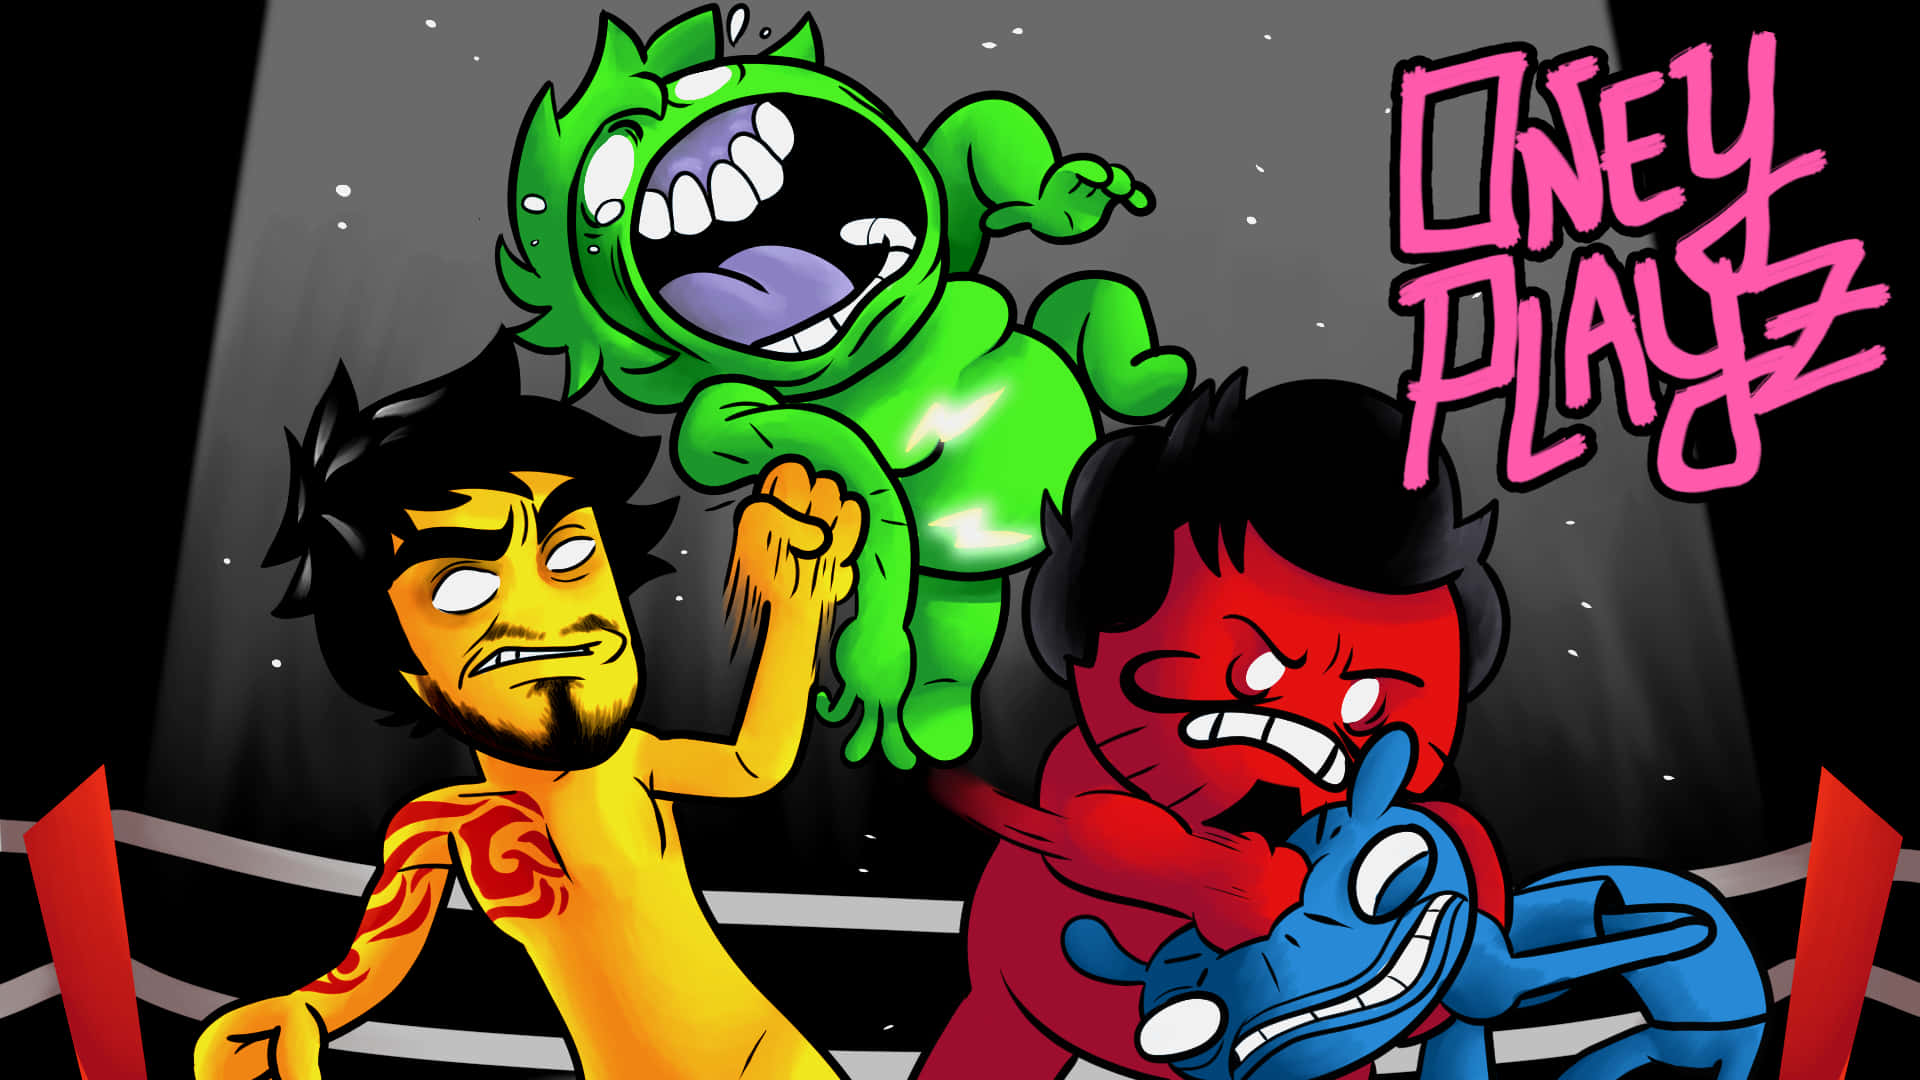 Diversify your violent video game experience with Gang Beasts Wallpaper